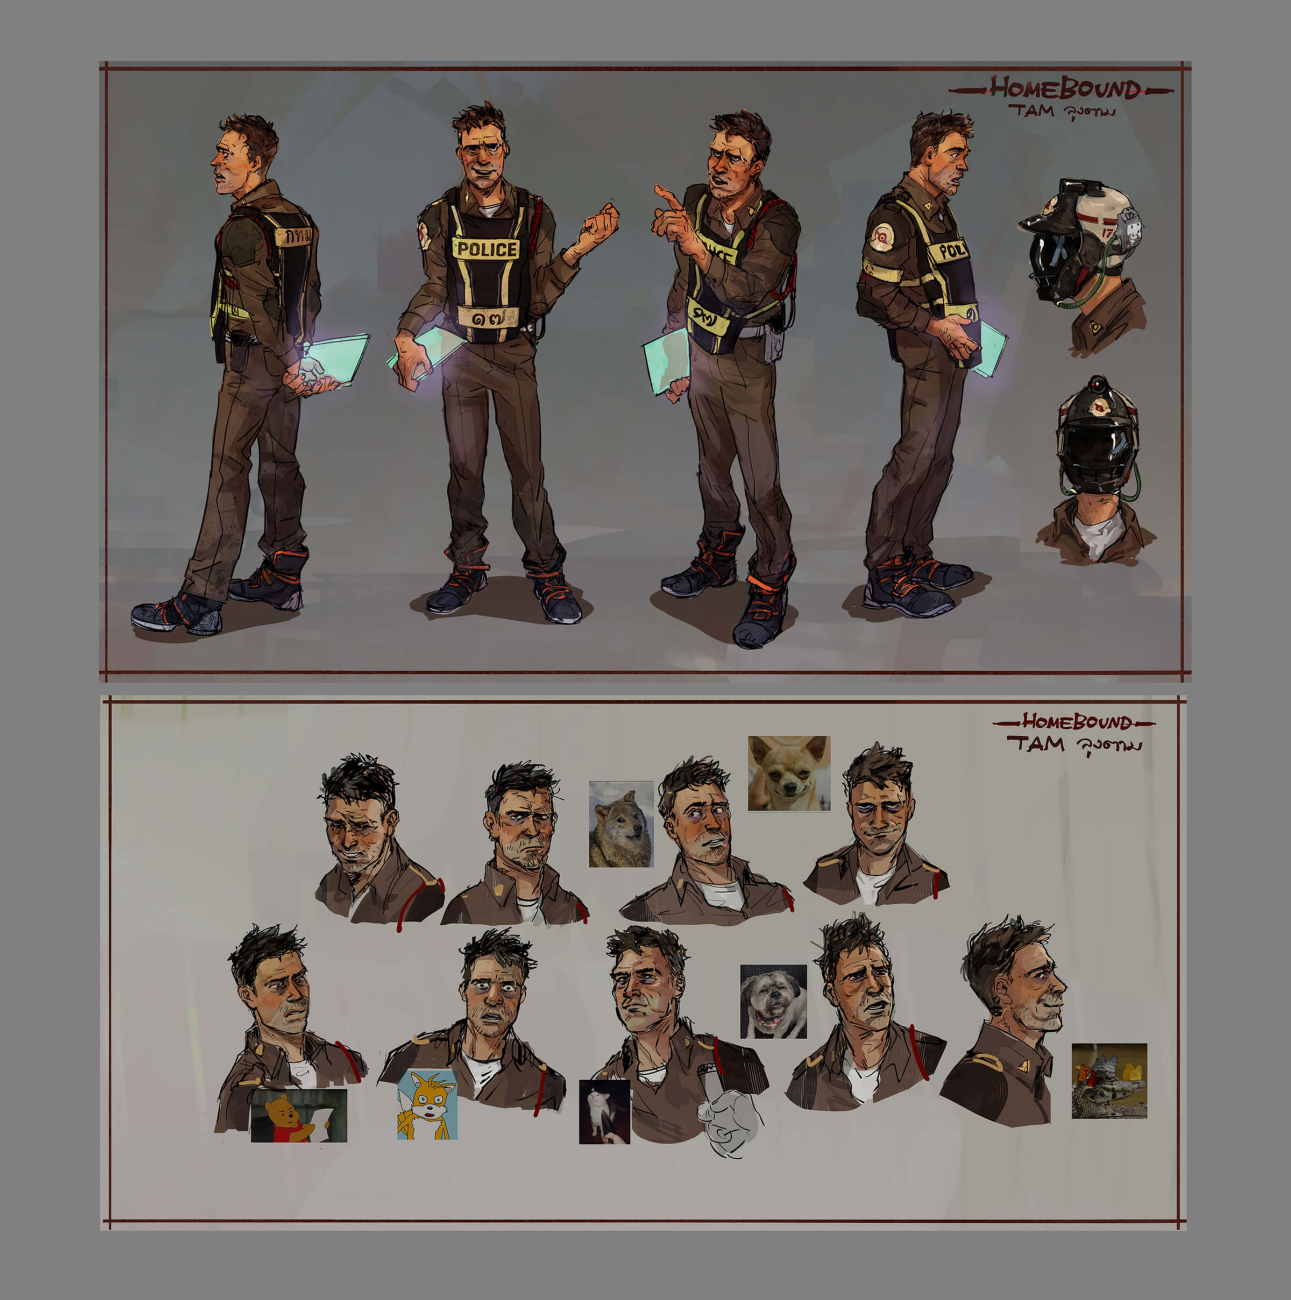 Various poses of a rumpled policeman character